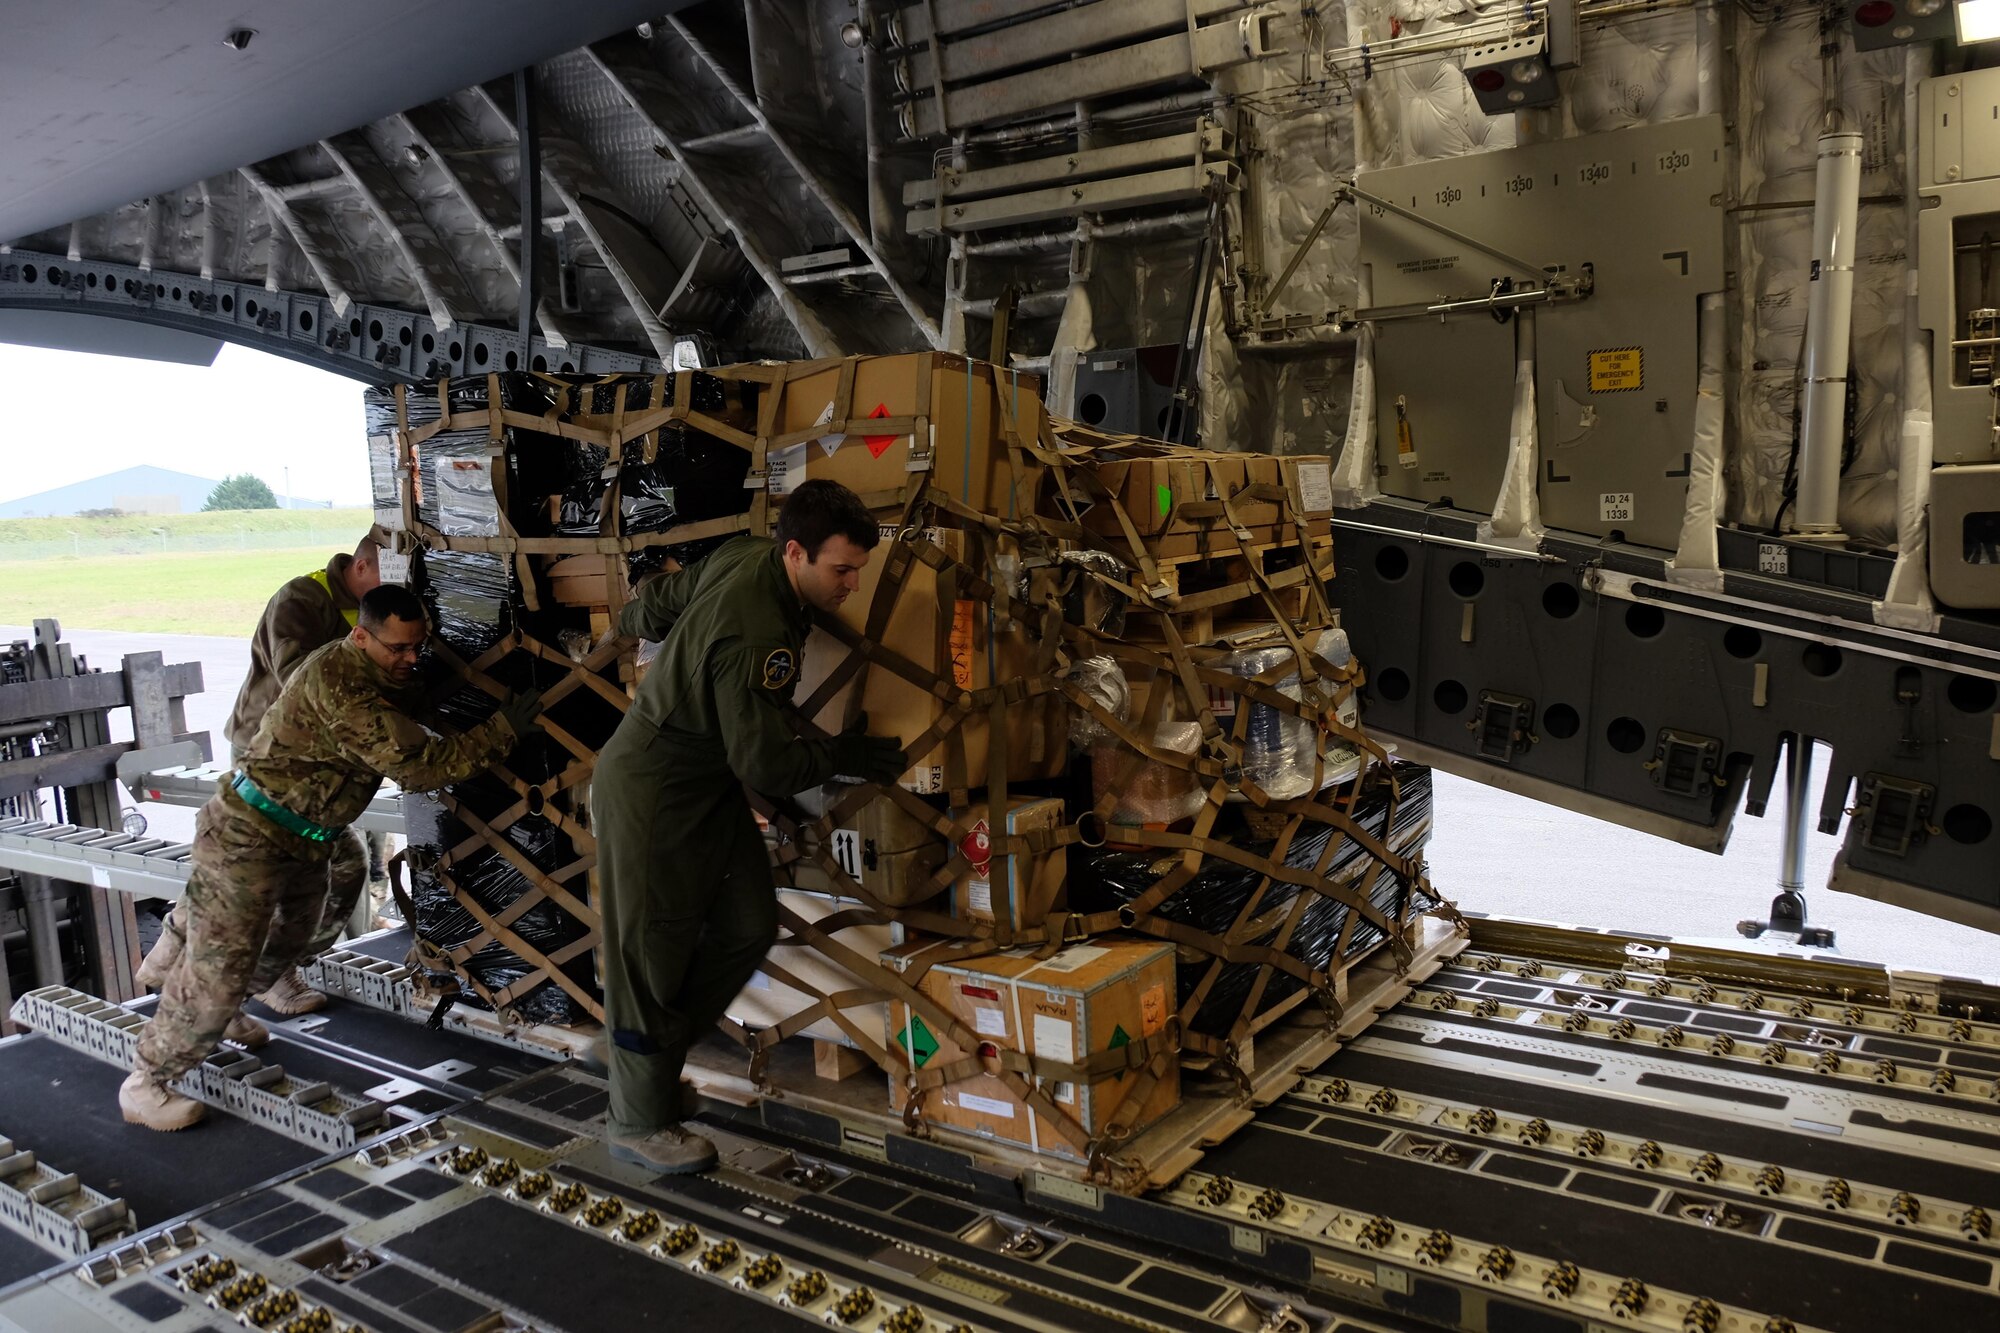 U.S. Army Reservists load pallets onto a C-17 from Joint Base Charleston, South Carolina during a joint partnered movement control  mission with French Air Force members Feb. 22, 2016. This mission is  in support of United States Africa Command’s Operation Echo Casemate resupply mission to French military forces deployed to the Central African Republic.  (Photo by Sgt. 1st Class Matthew Chlosta)

